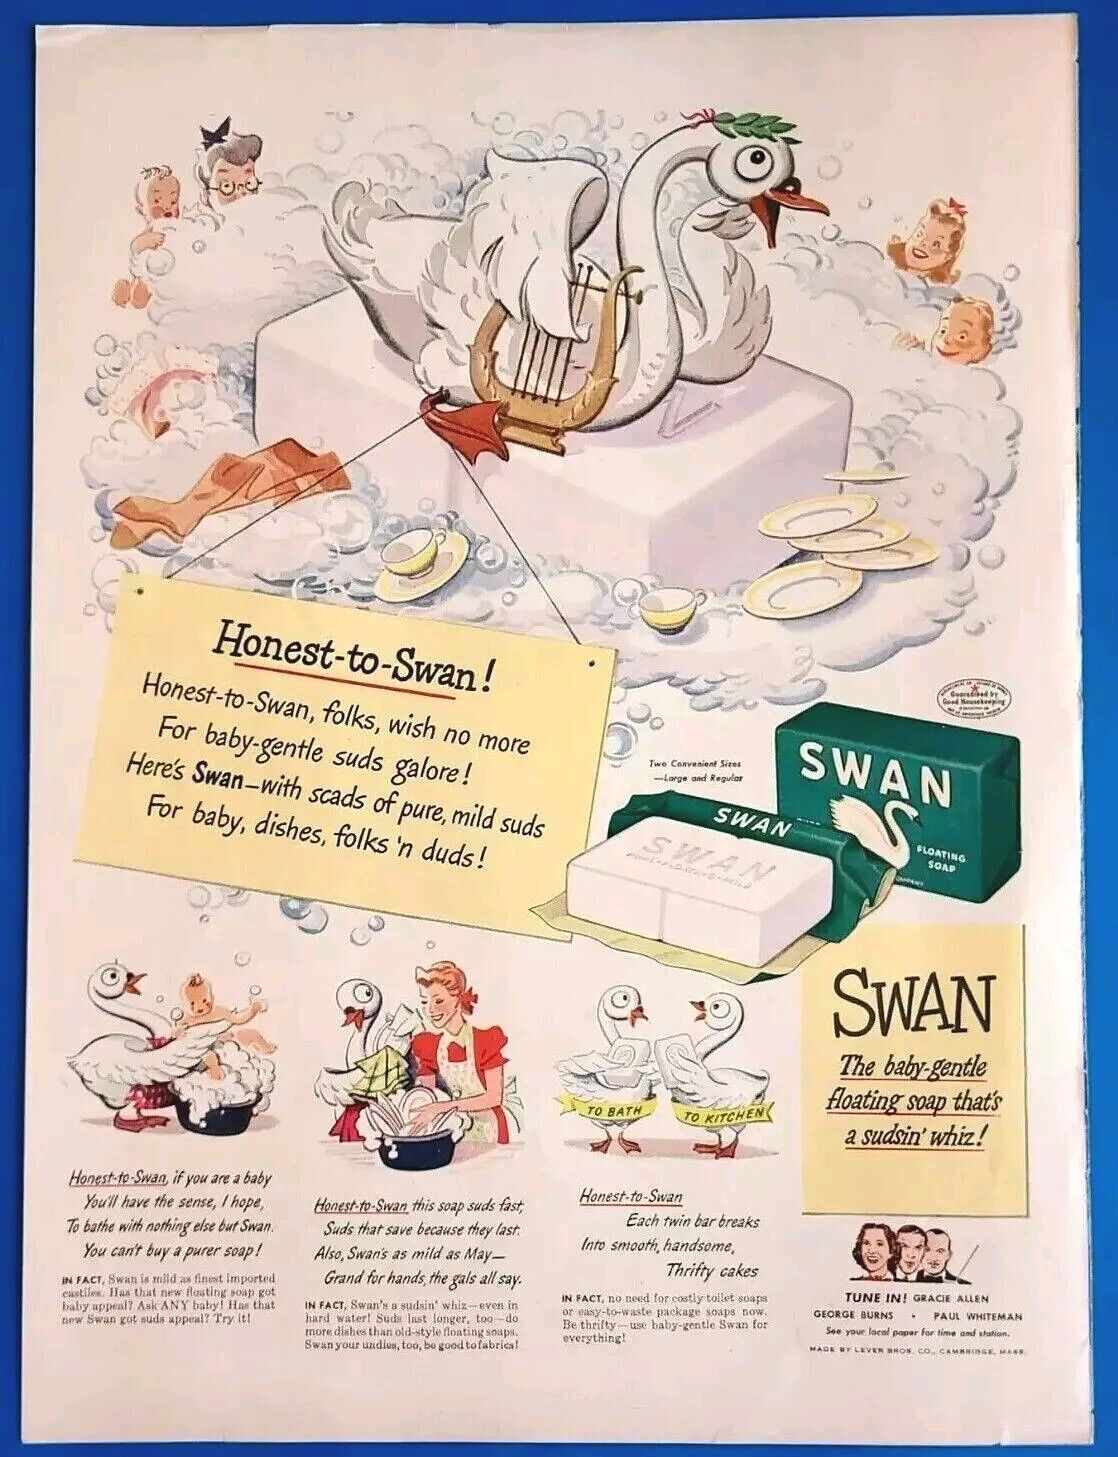 1942 Swan The Baby Gentle Floating Soap 1940\'s Magazine Print Ad Honest-to-Swan